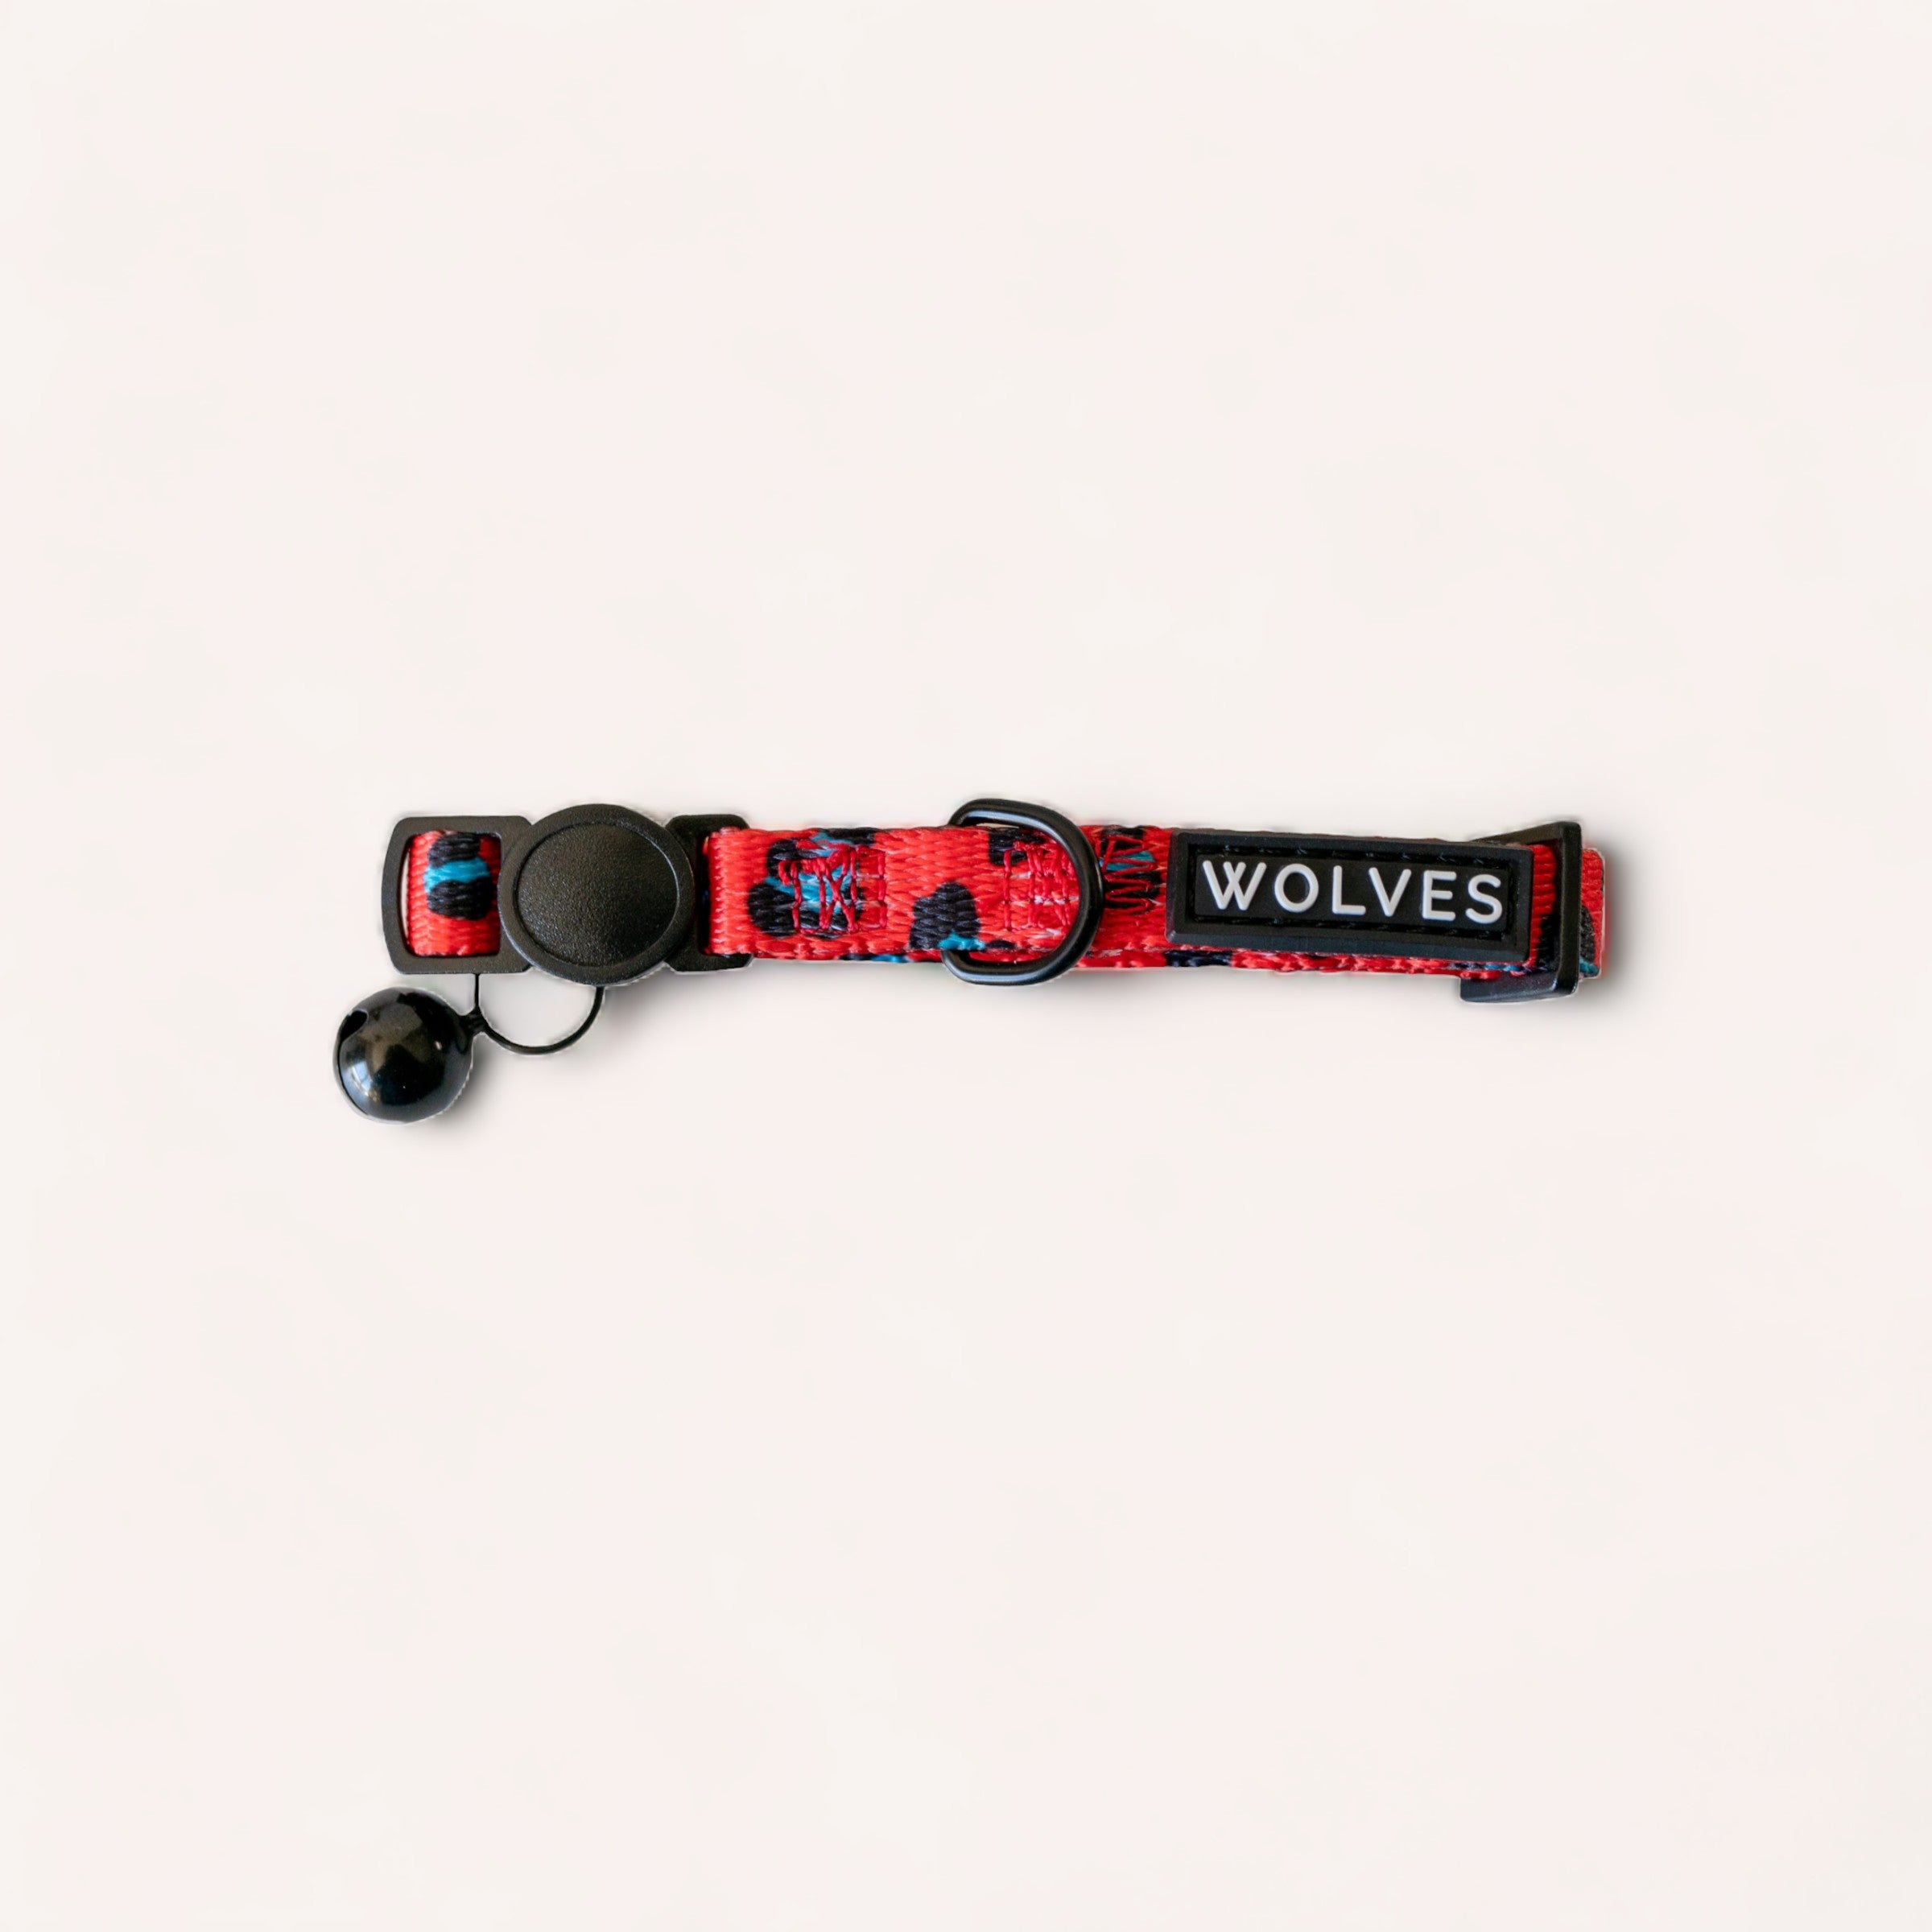 A red and black patterned Cleo Cat Collar by Wolves of Wellington with "wolves" text and an attached silver bell, featuring a breakaway buckle, laid out on a plain white background.